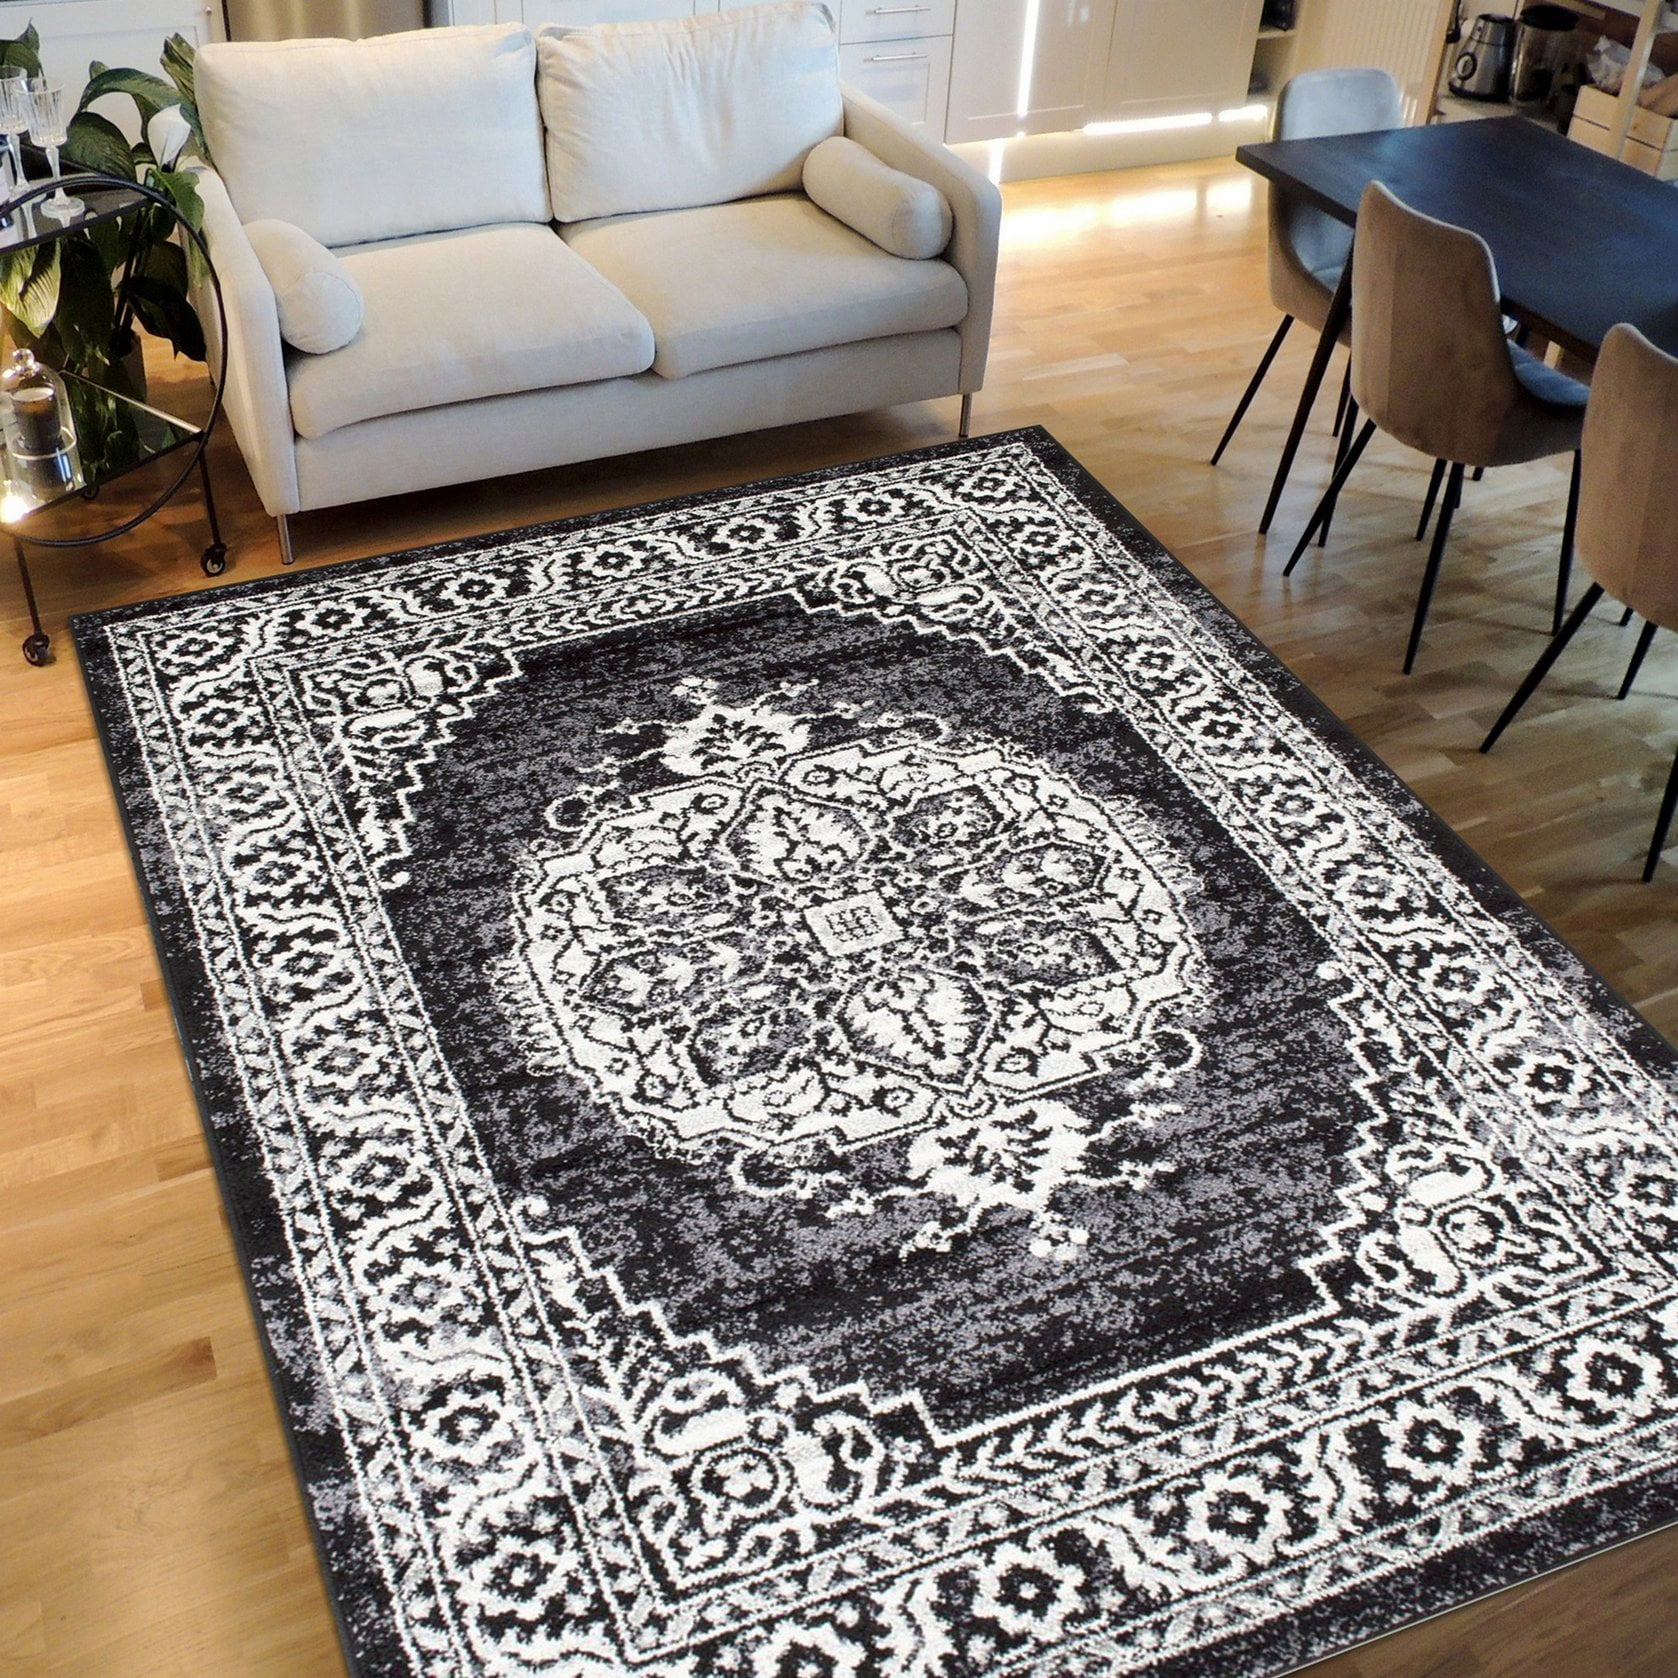 Black/White/Charcoal Faded, Oriental Distressed Area Rug Vintage Persian Area Rug Abstract